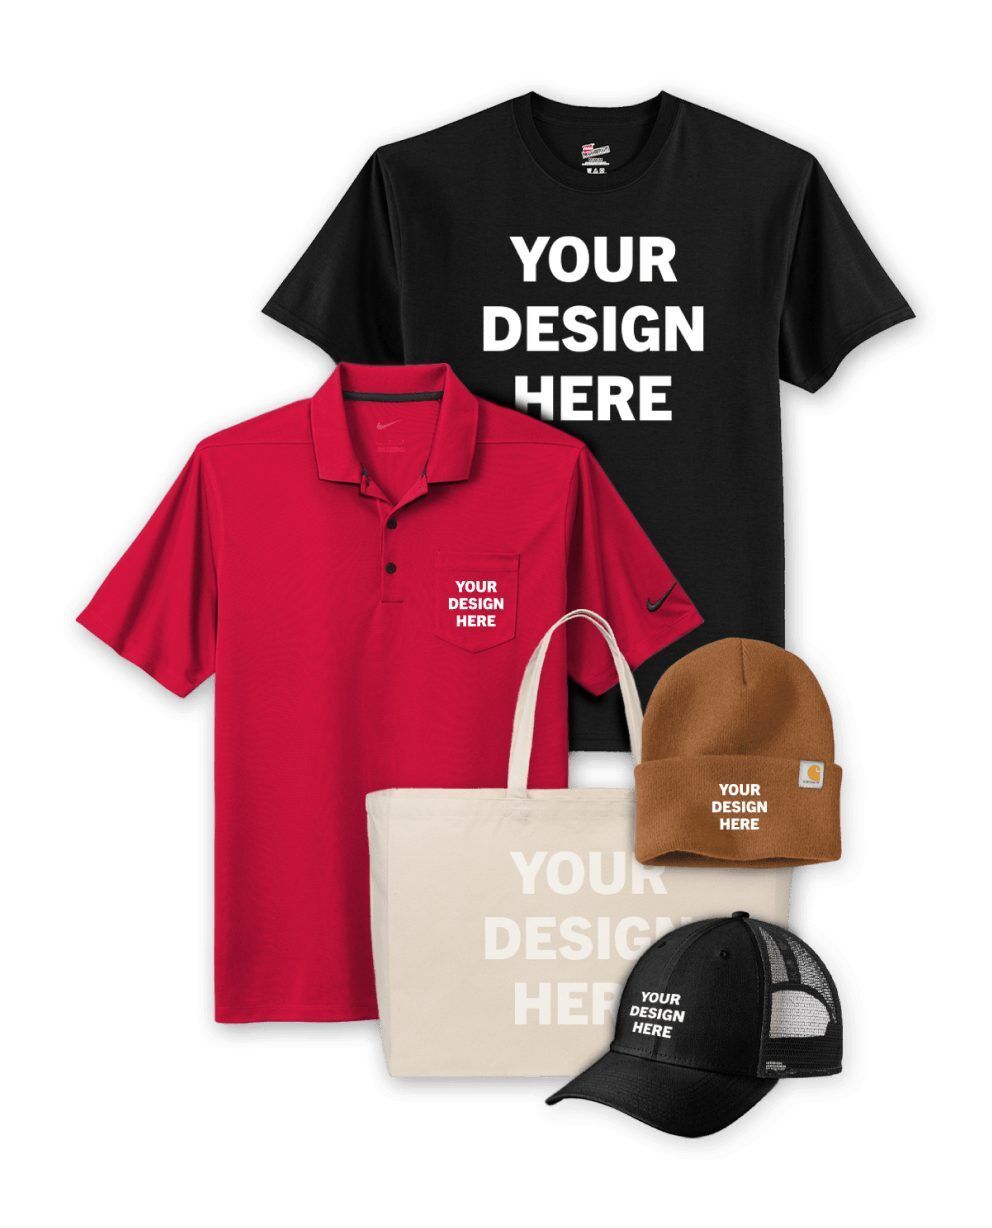 Design Unique And Personalized T-Shirts With A State-of-the-Art T-s